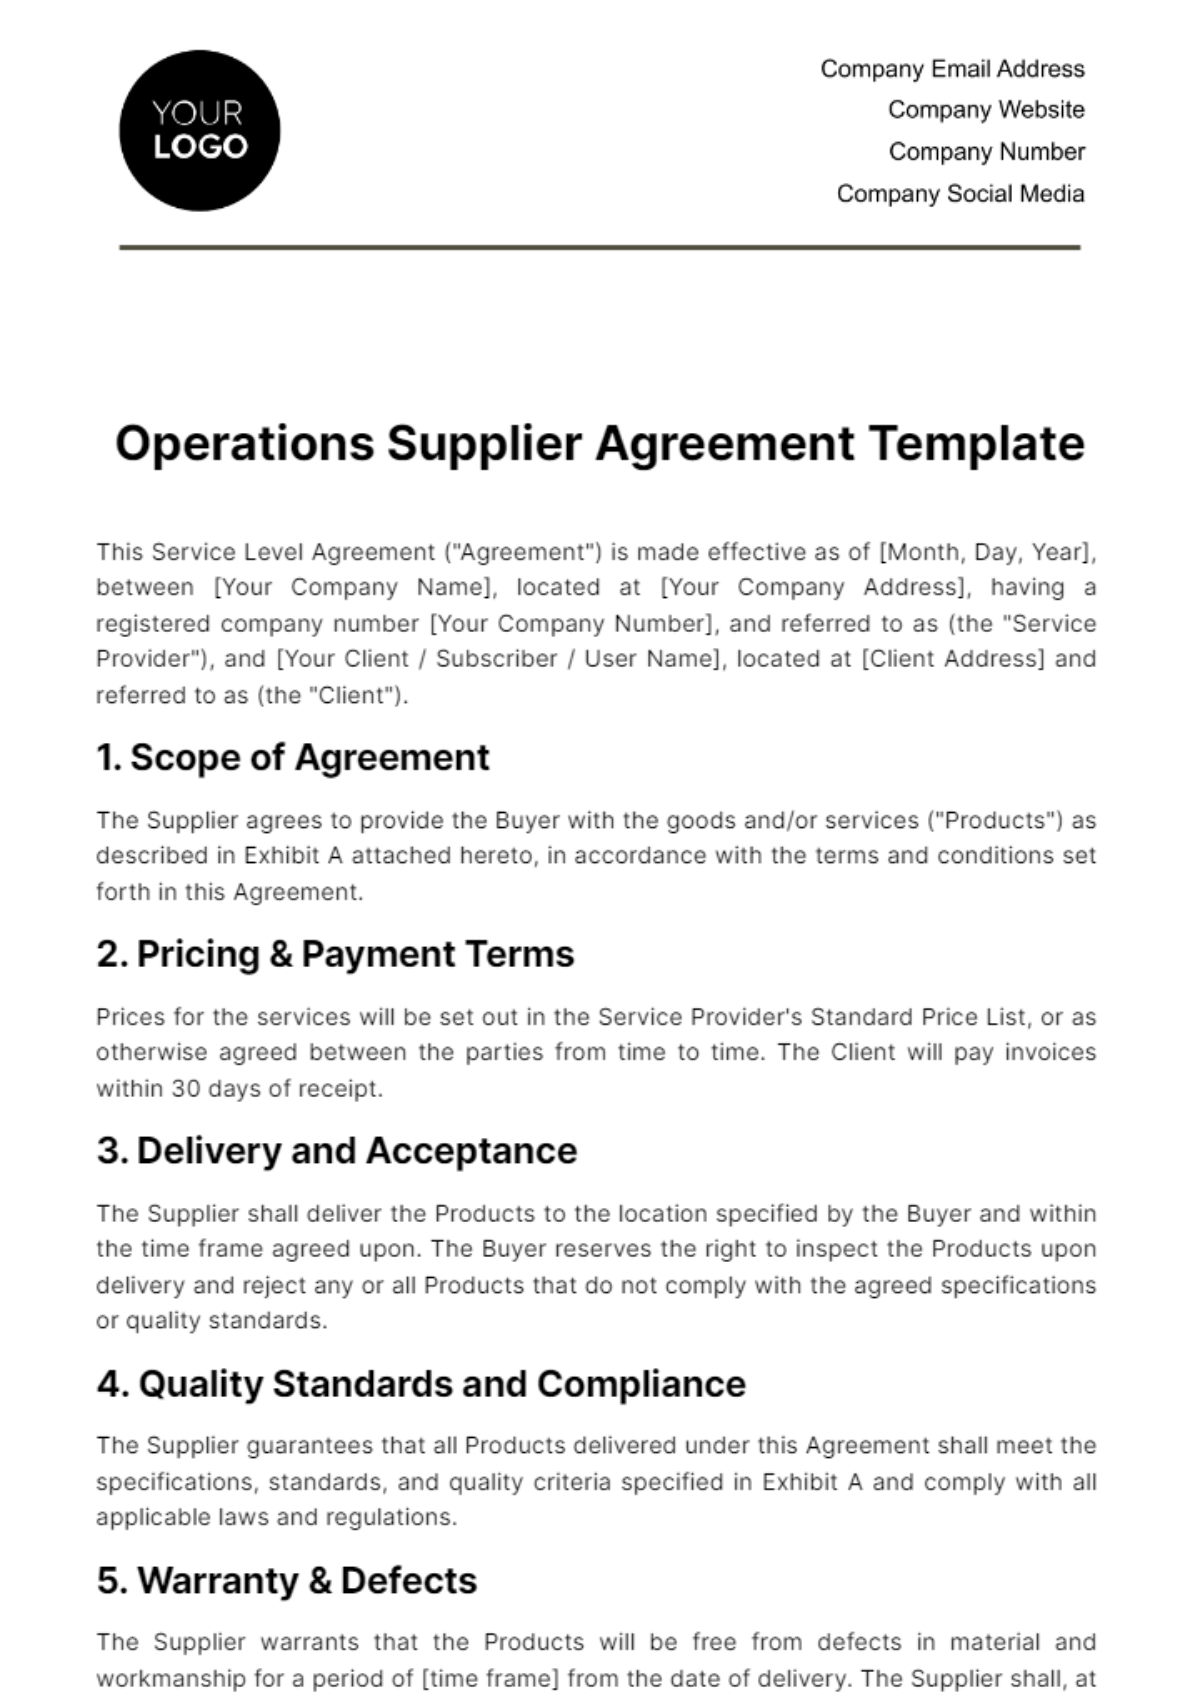 Operations Supplier Agreement Template